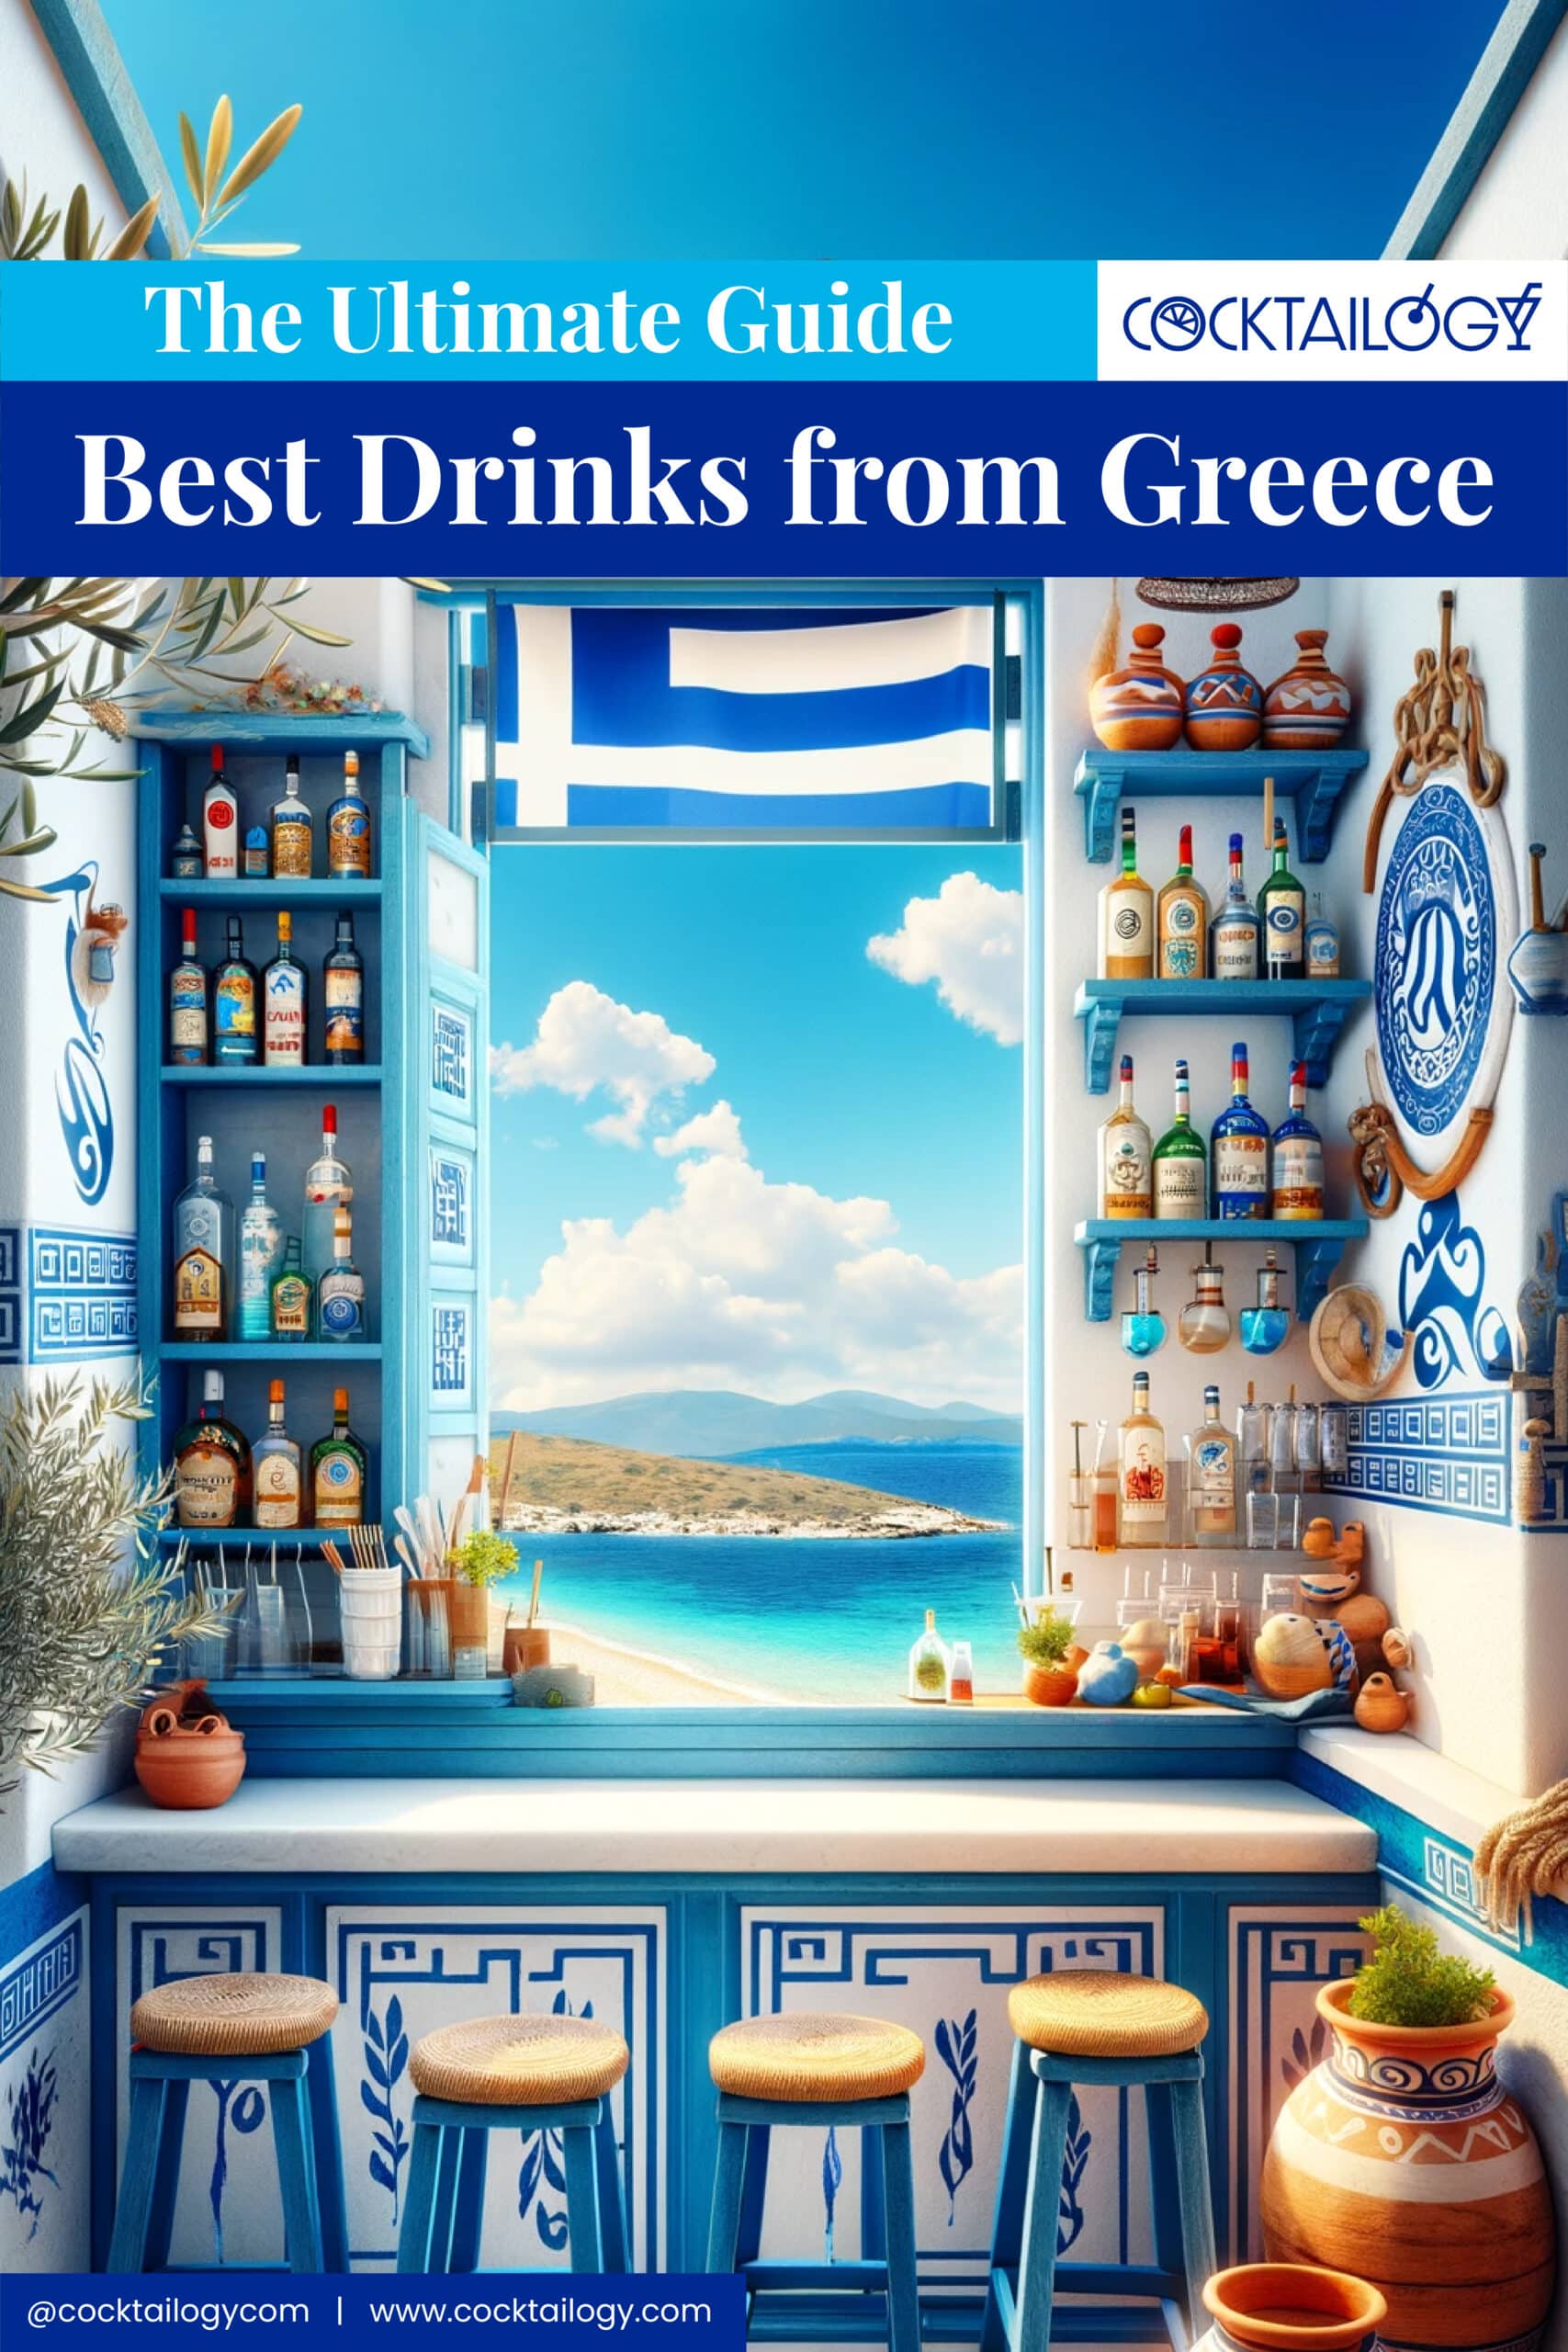 Drinks from Greece